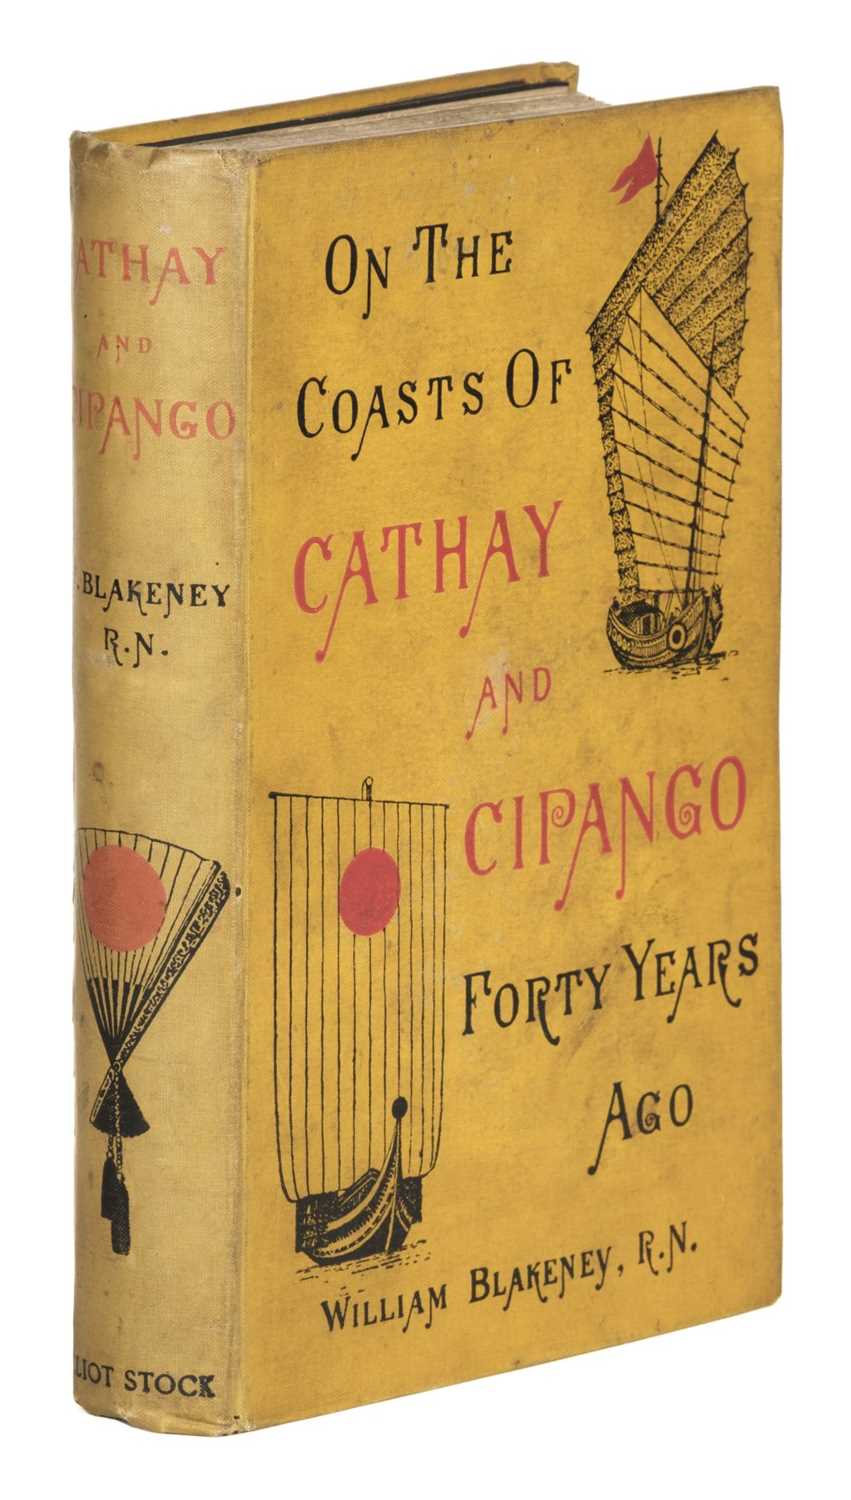 Lot 45 - Blakeney (William). On the Coasts of Cathay and Cipango, 1st edition, 1902